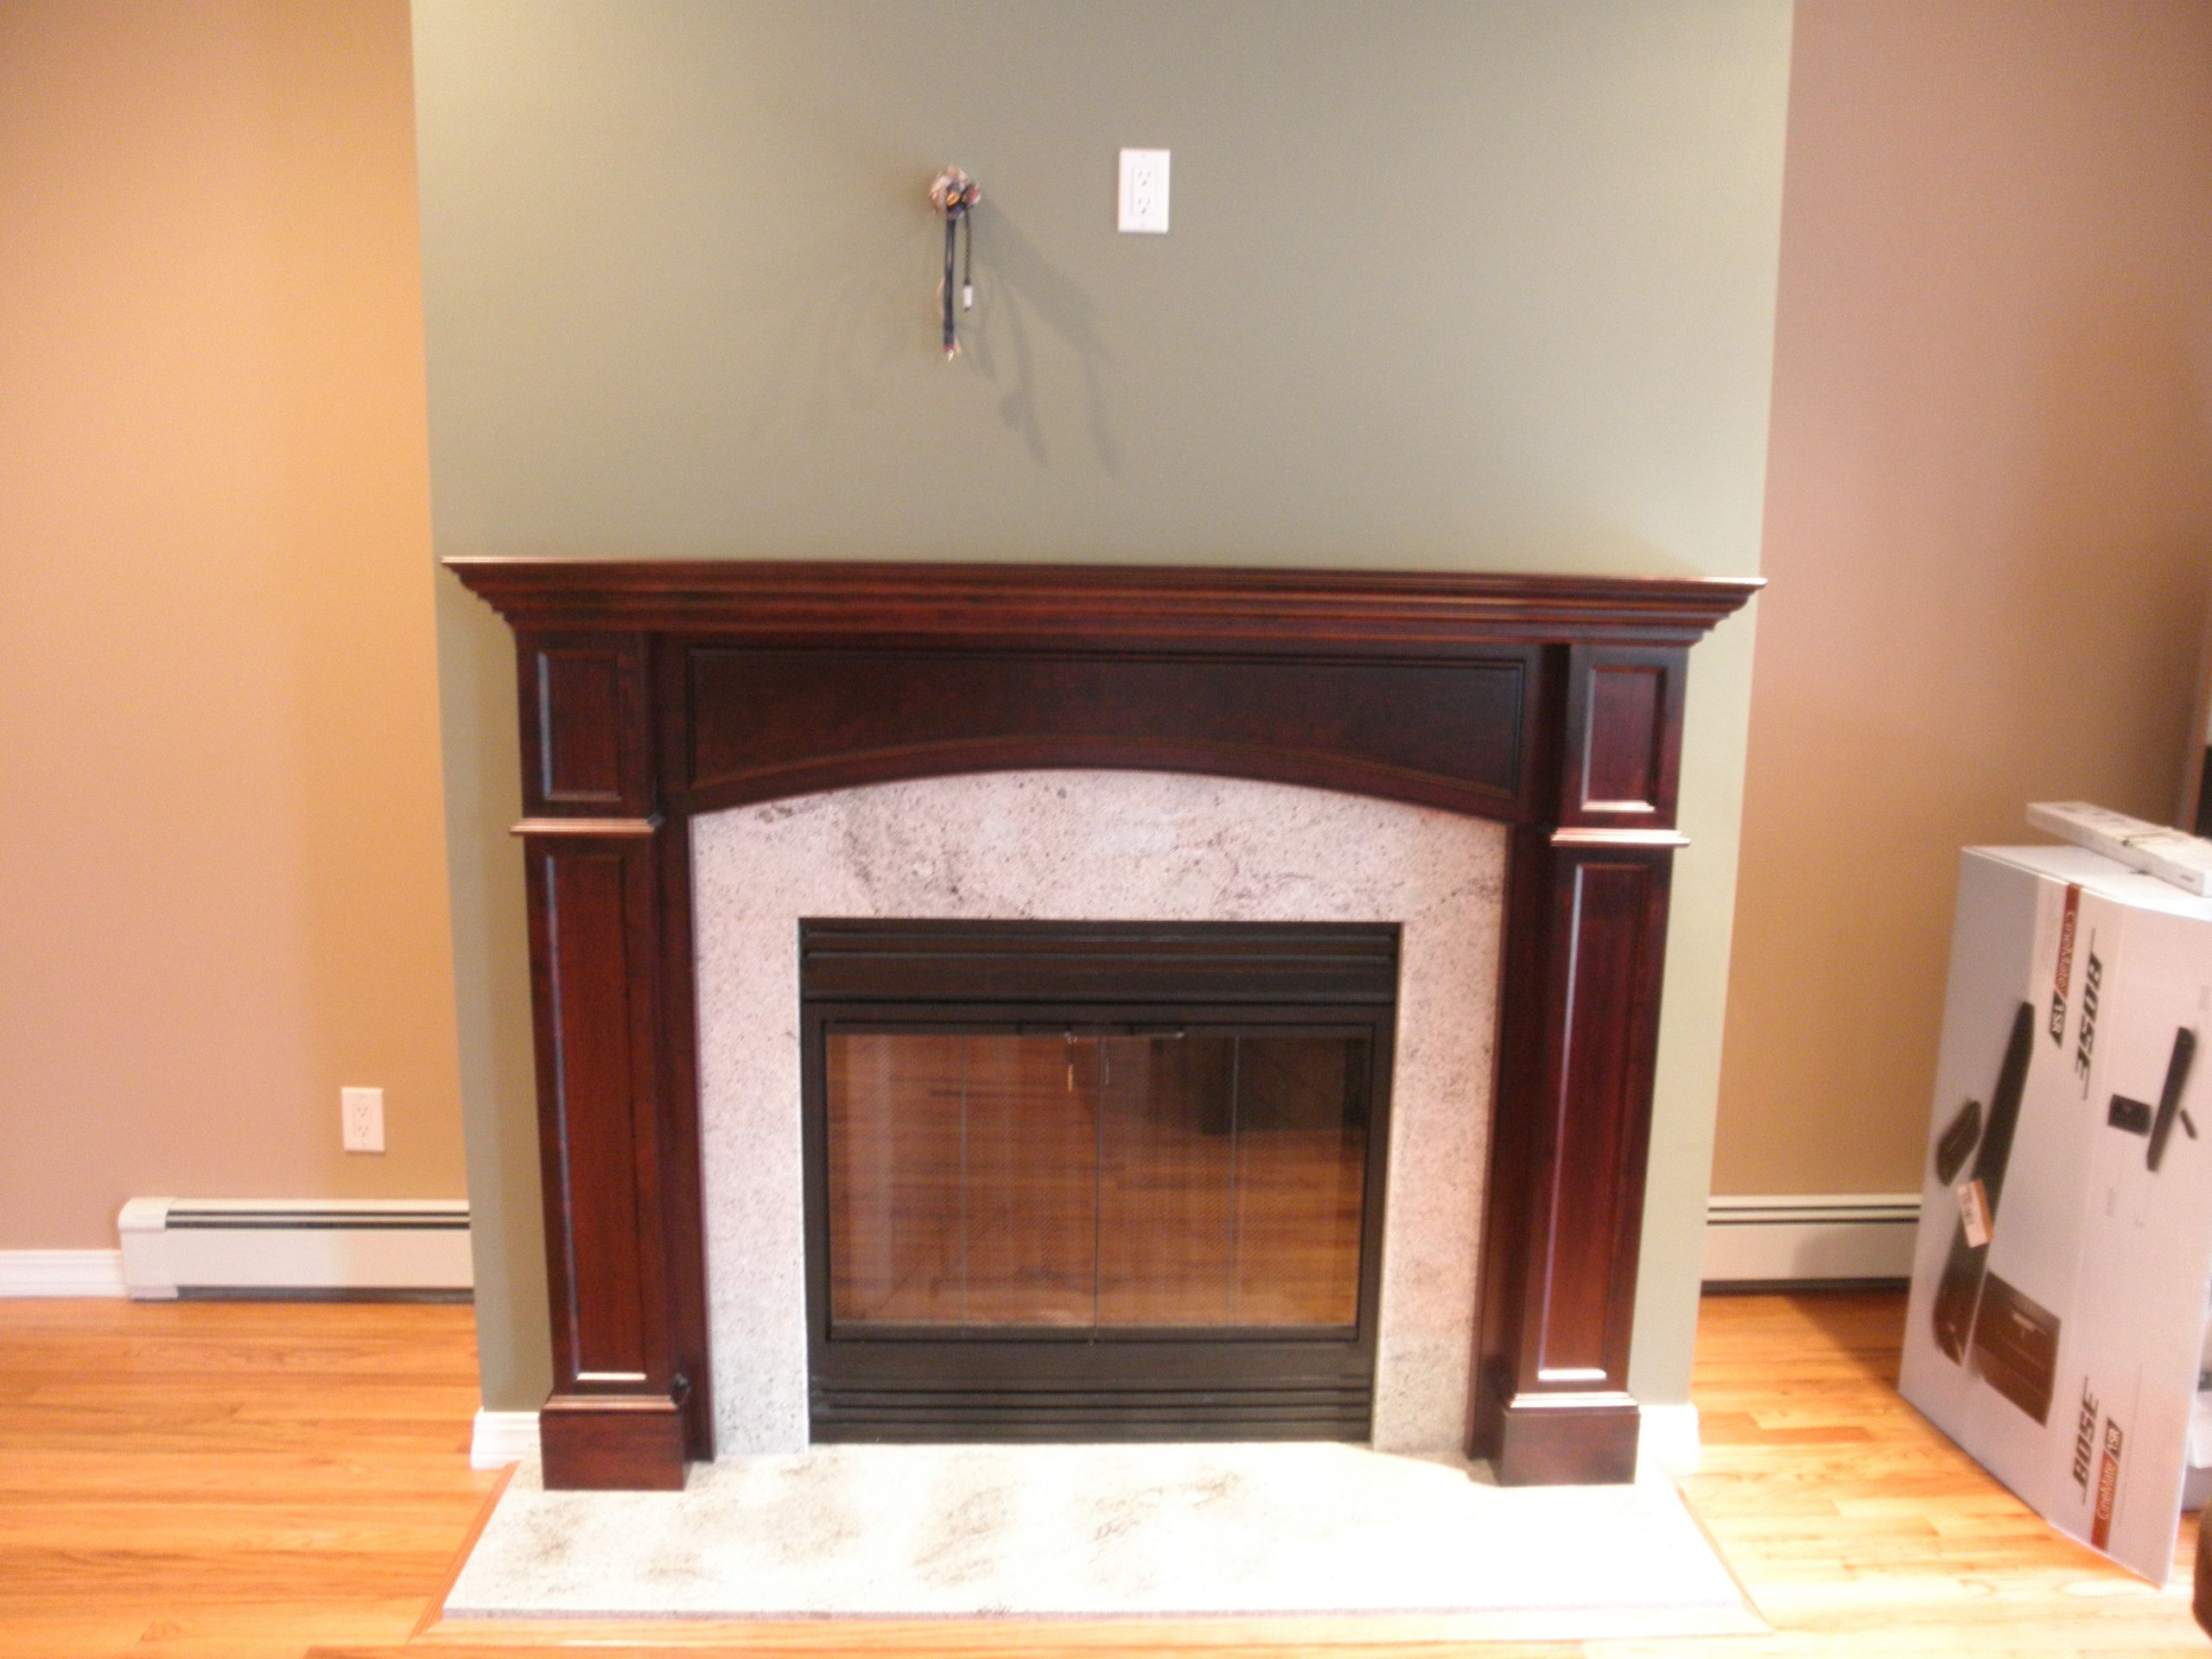 Nyc Fireplaces &amp; Outdoor Kitchens
 Mantels Give an Old Fireplace a New Look